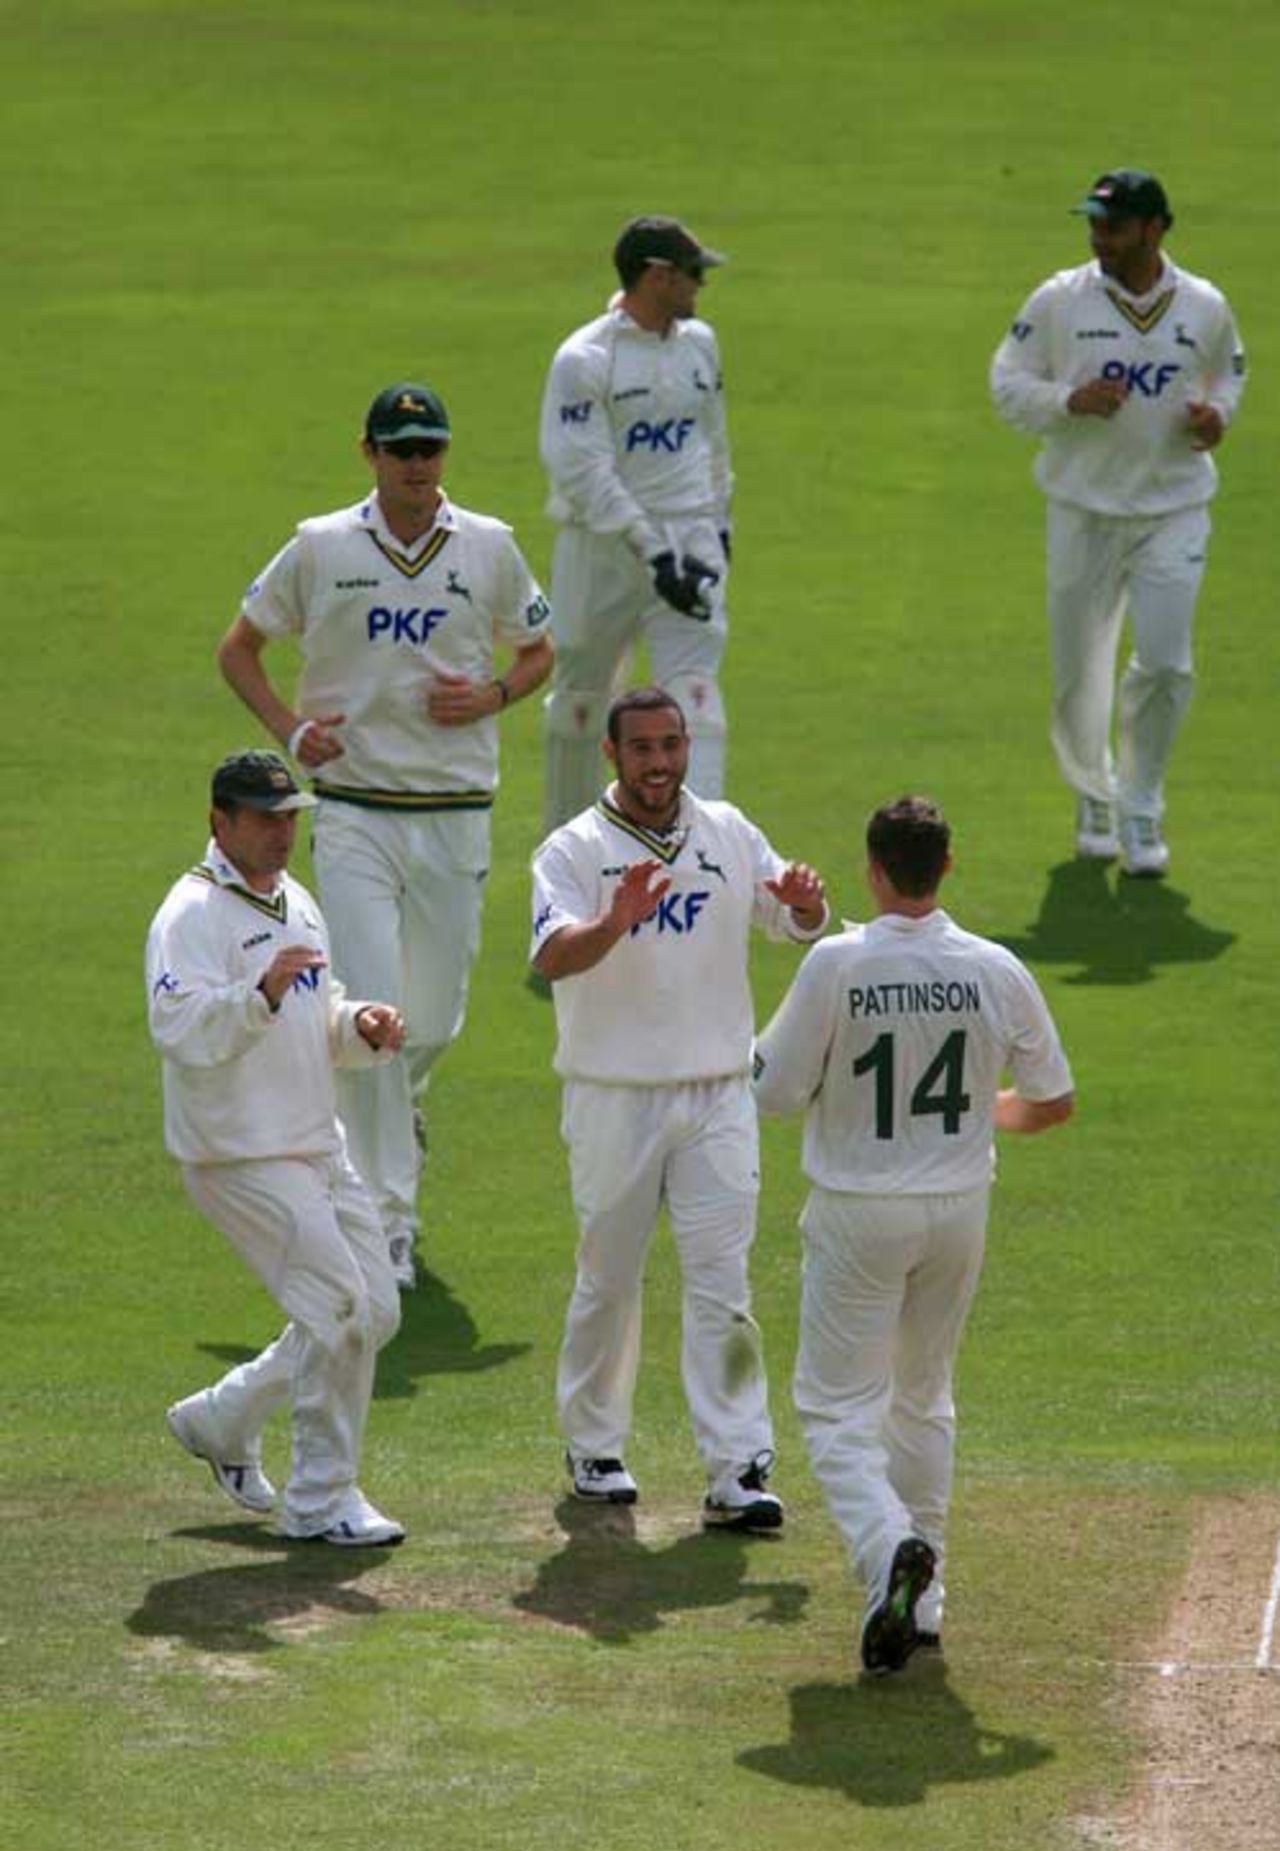 Darren Pattinson and Andre Adams celebrate the wicket of Wesley Durston, Nottinghamshire v Somerset, Trent Bridge, County Championship, 2008 